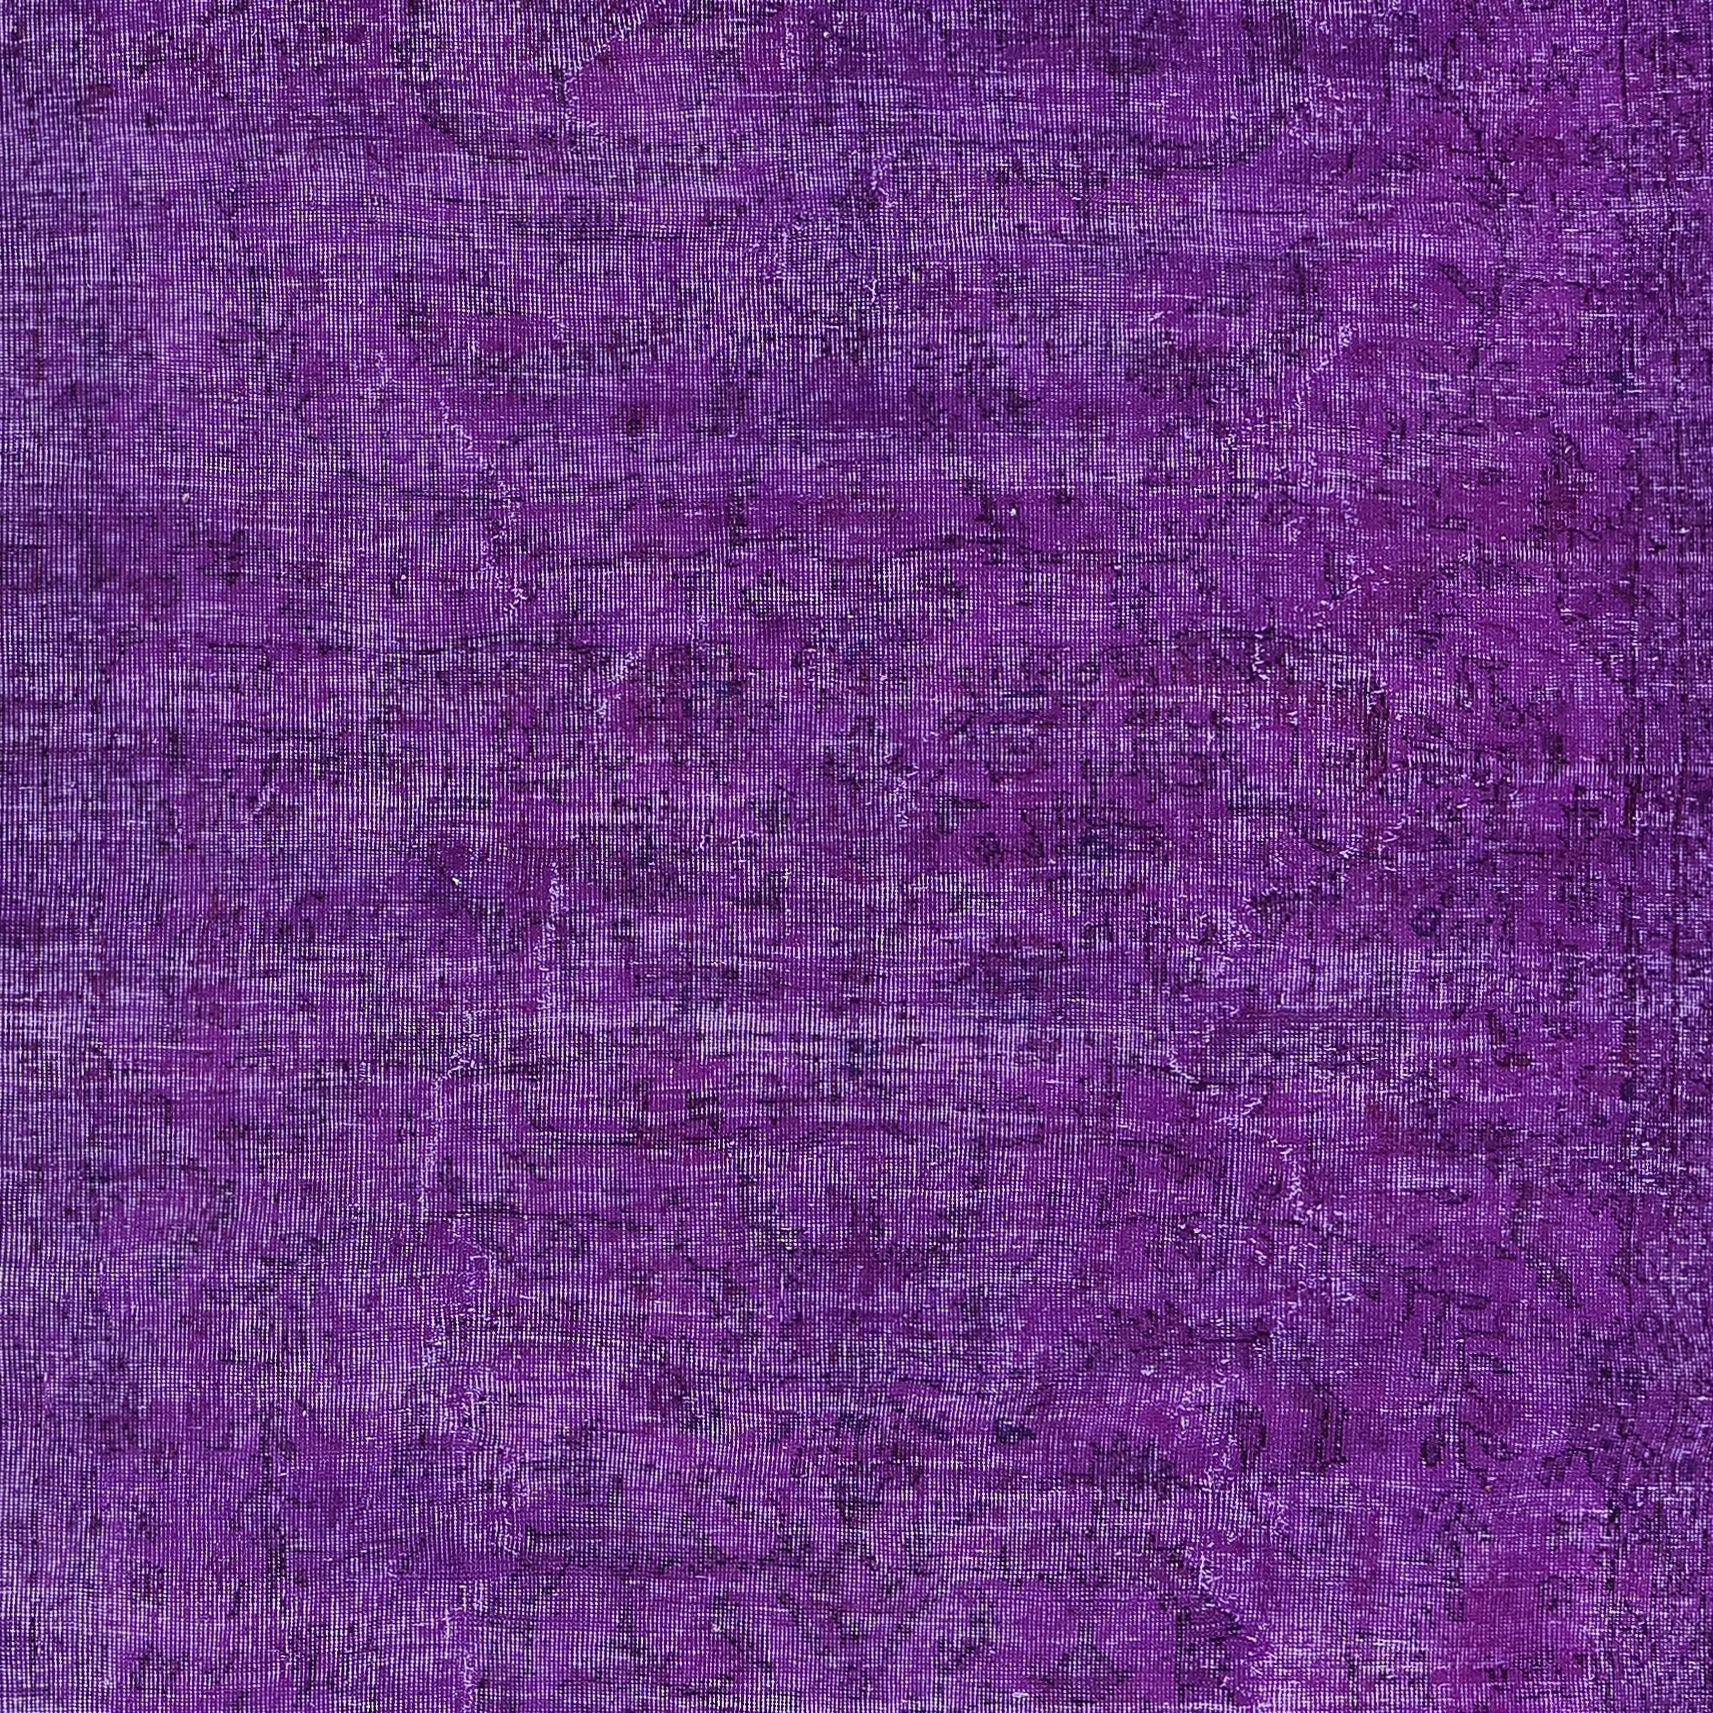 Hand-Woven 7x10.2 Ft Unique Handknotted Modern Large Rug in Purple. Turkish Bohem Carpet For Sale